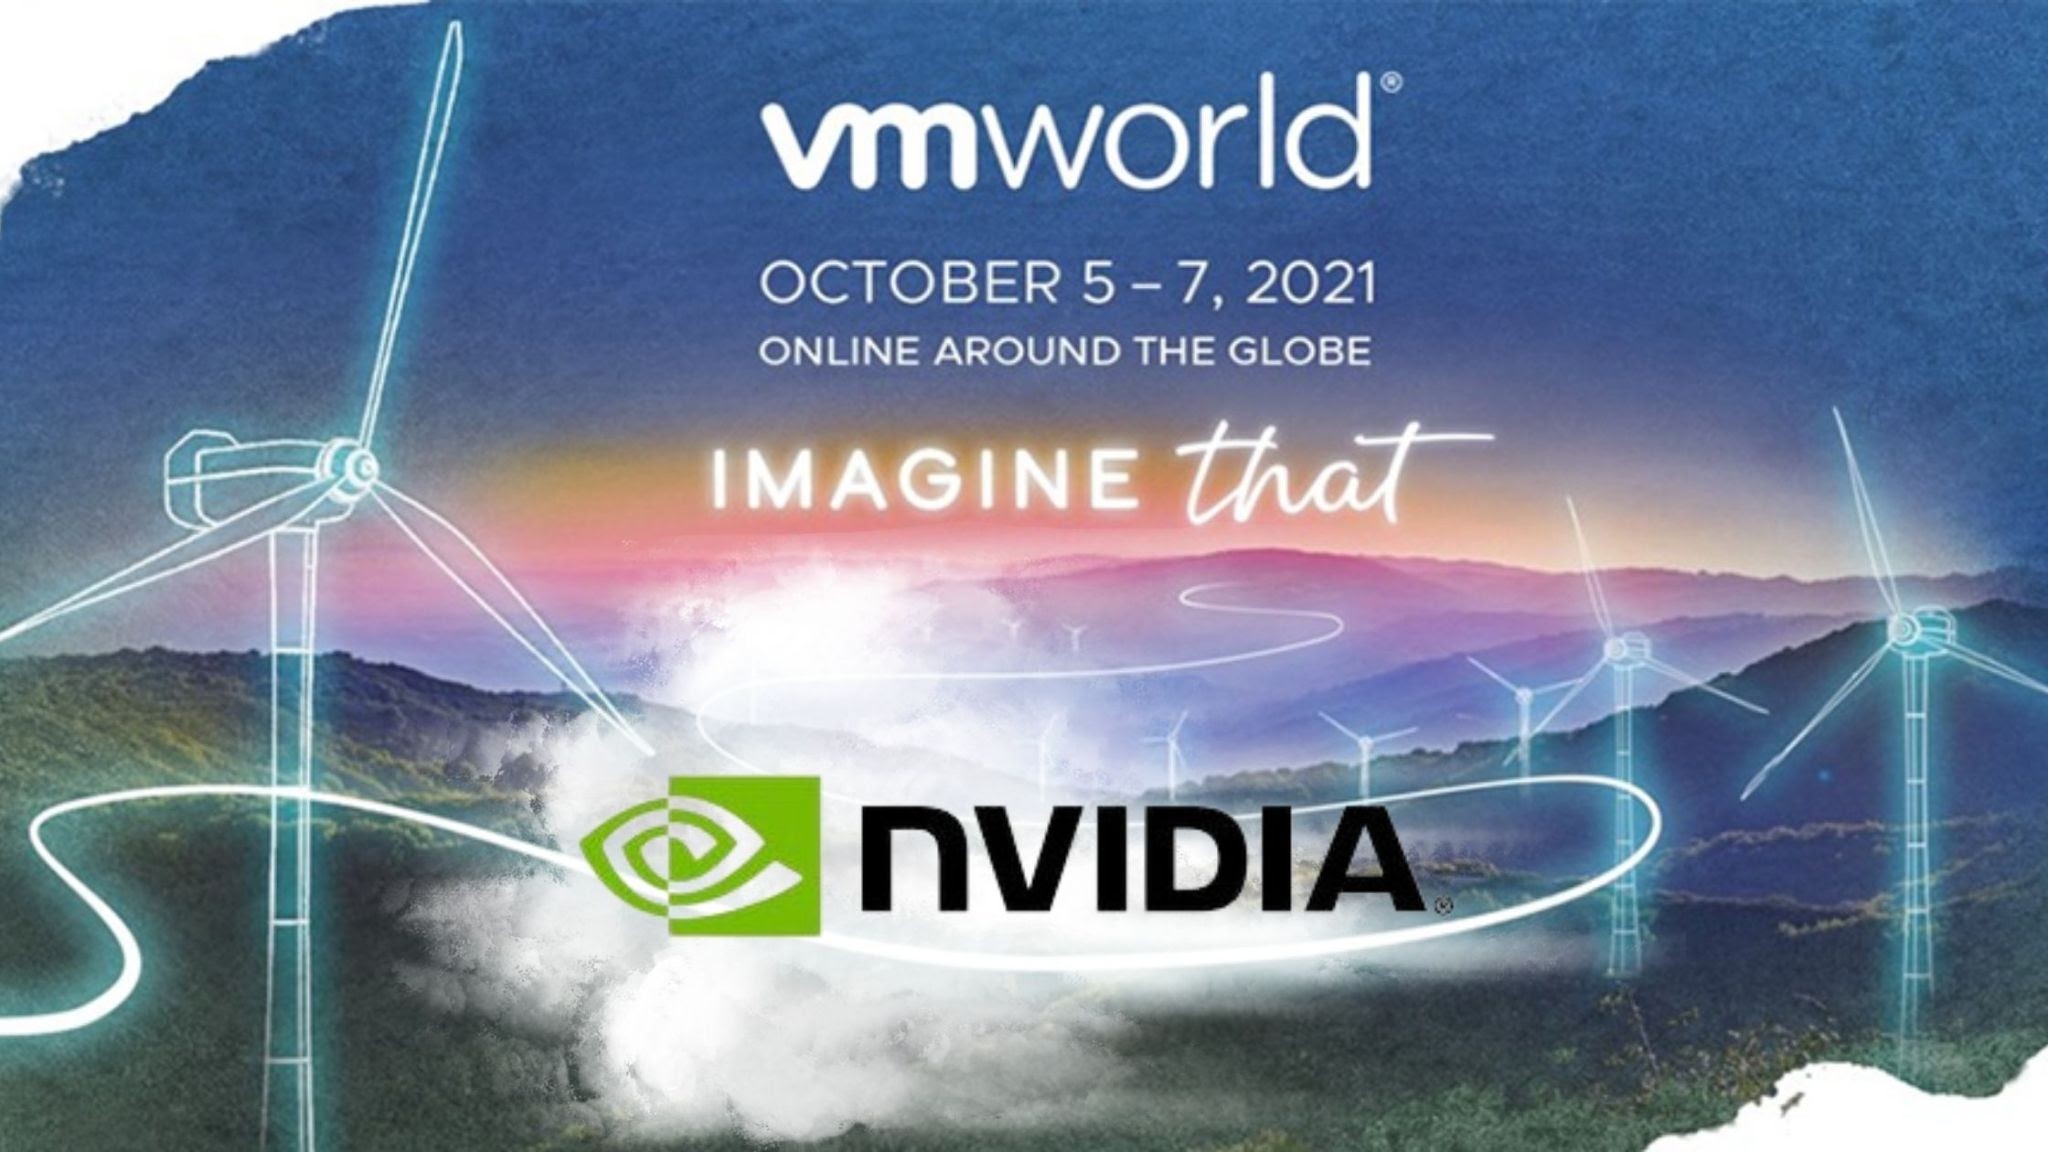 All The Announcements Made By NVIDIA At VMworld 2021